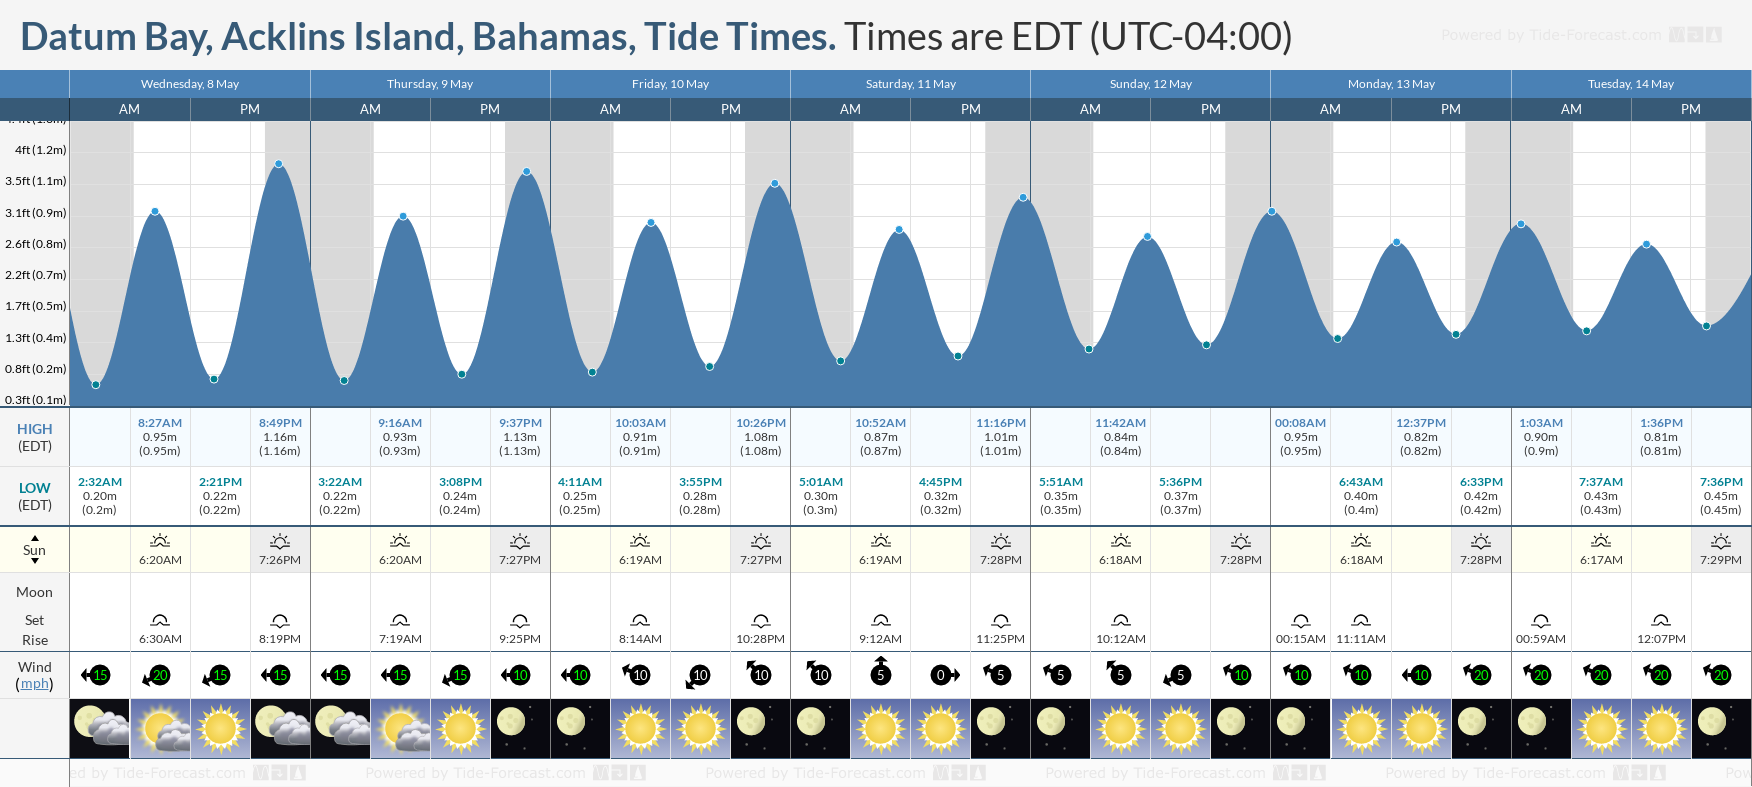 Datum Bay, Acklins Island, Bahamas Tide Chart including high and low tide tide times for the next 7 days